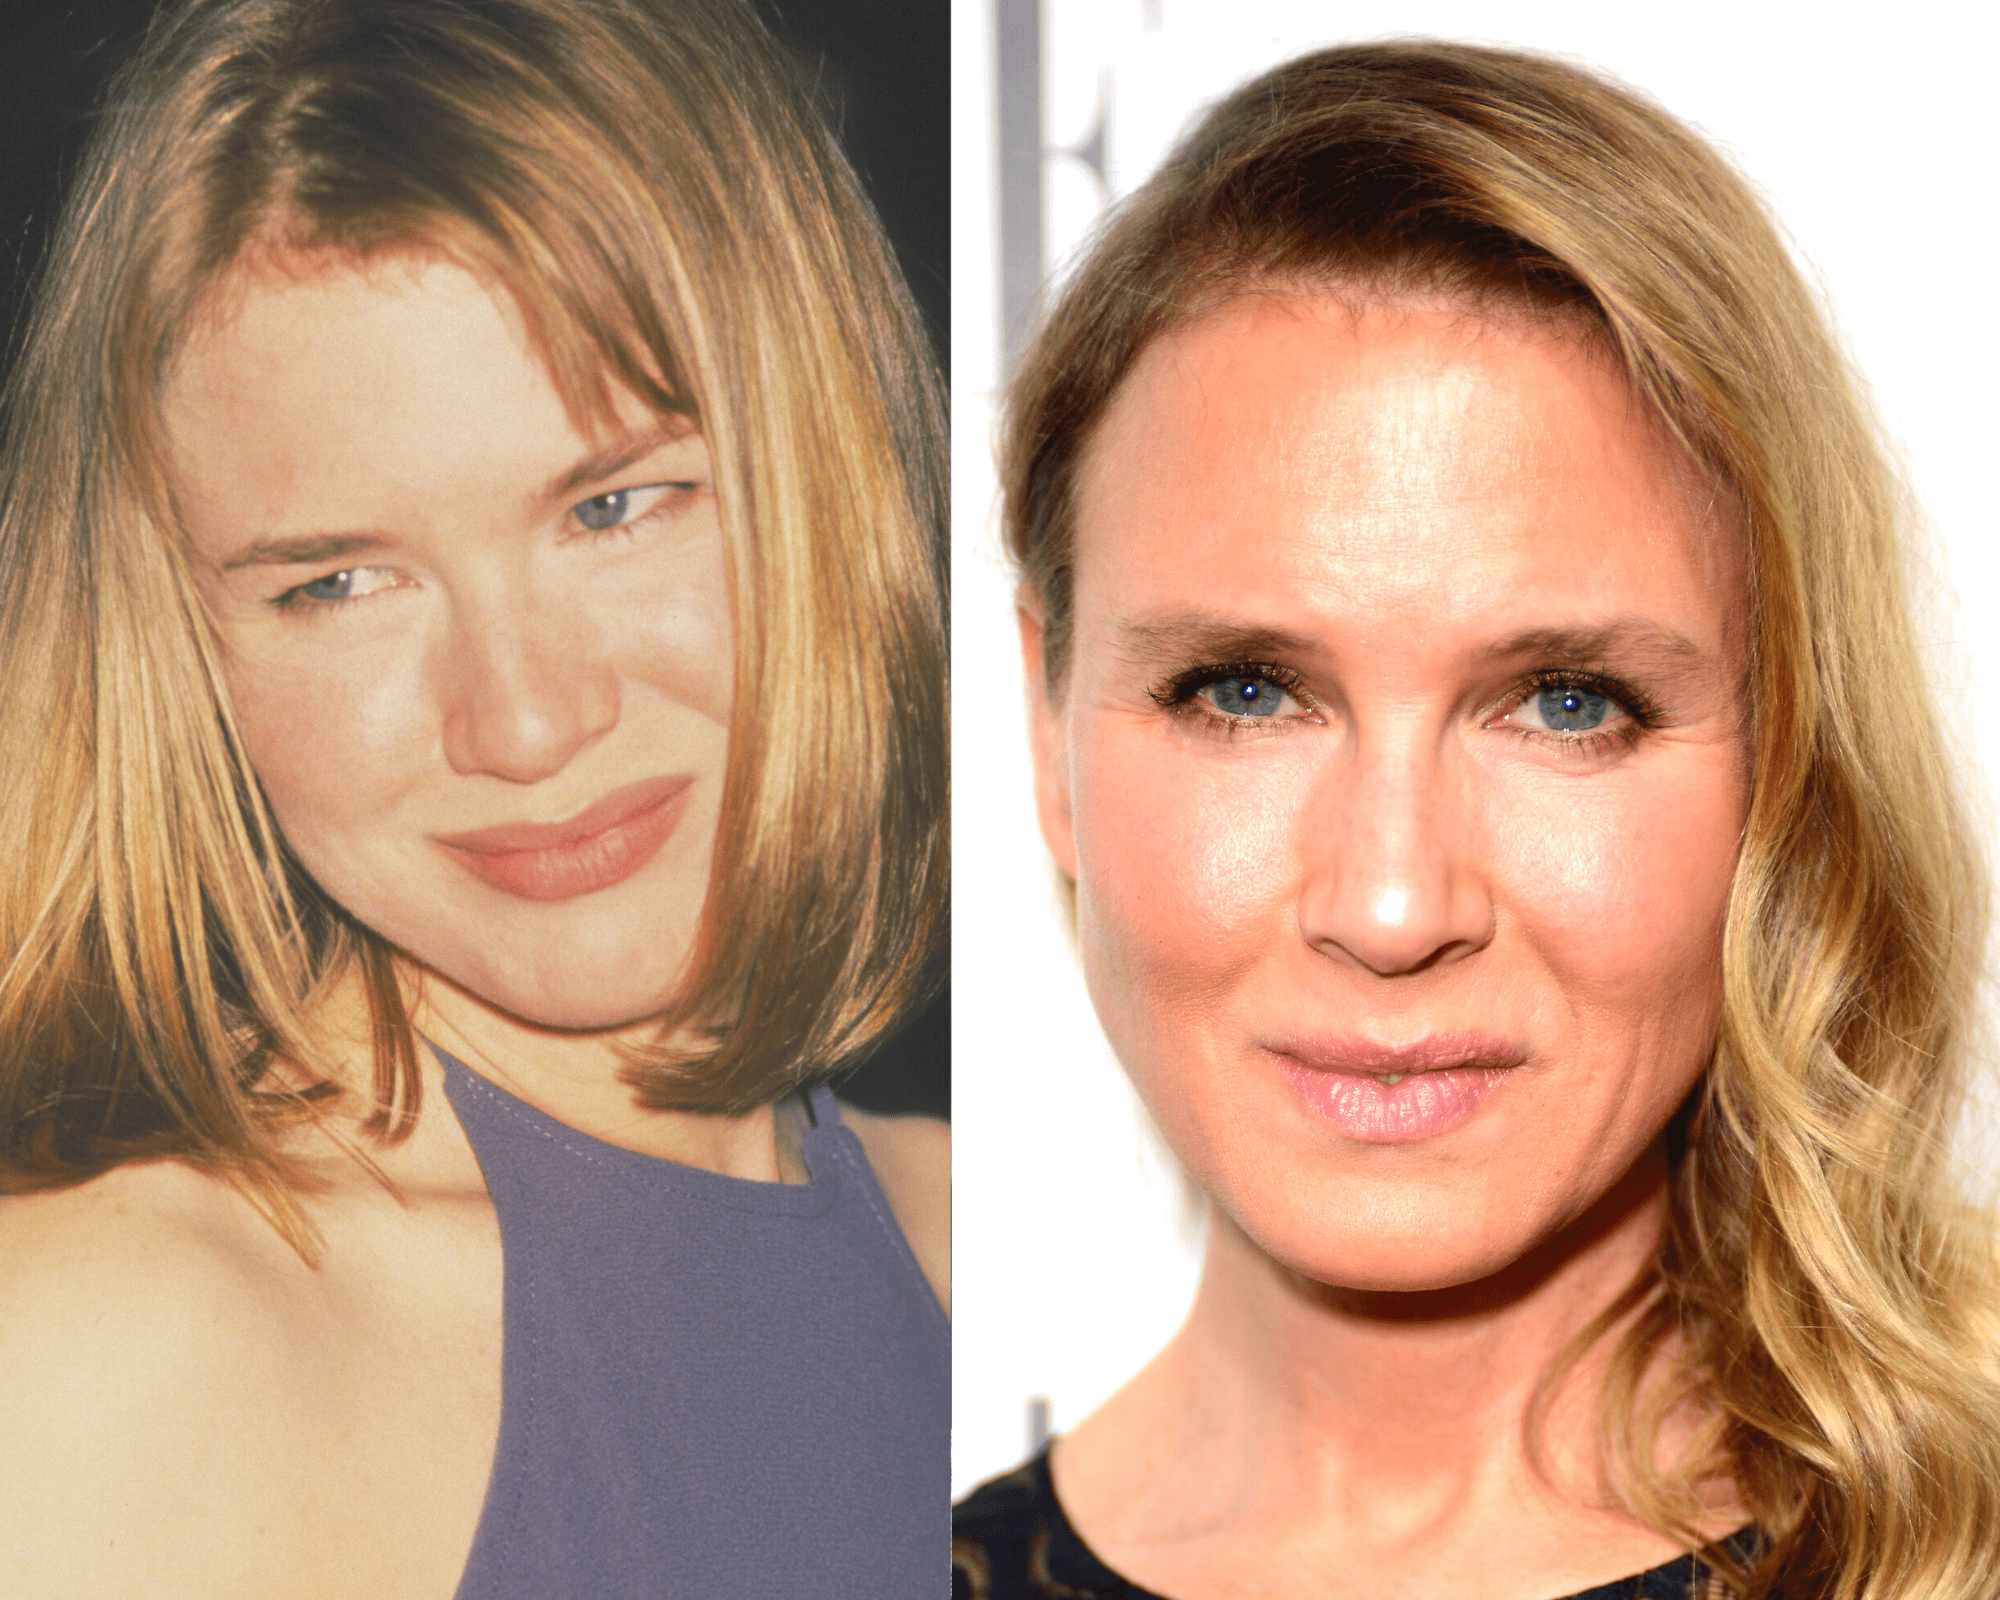 Actress Renee Zellweger at the "Jerry Maguire" Los Angeles premiere in 1996 | Renee Zellweger at the Four Seasons Hotel on October 20, 2014 in Beverly Hills, California | Getty Images 